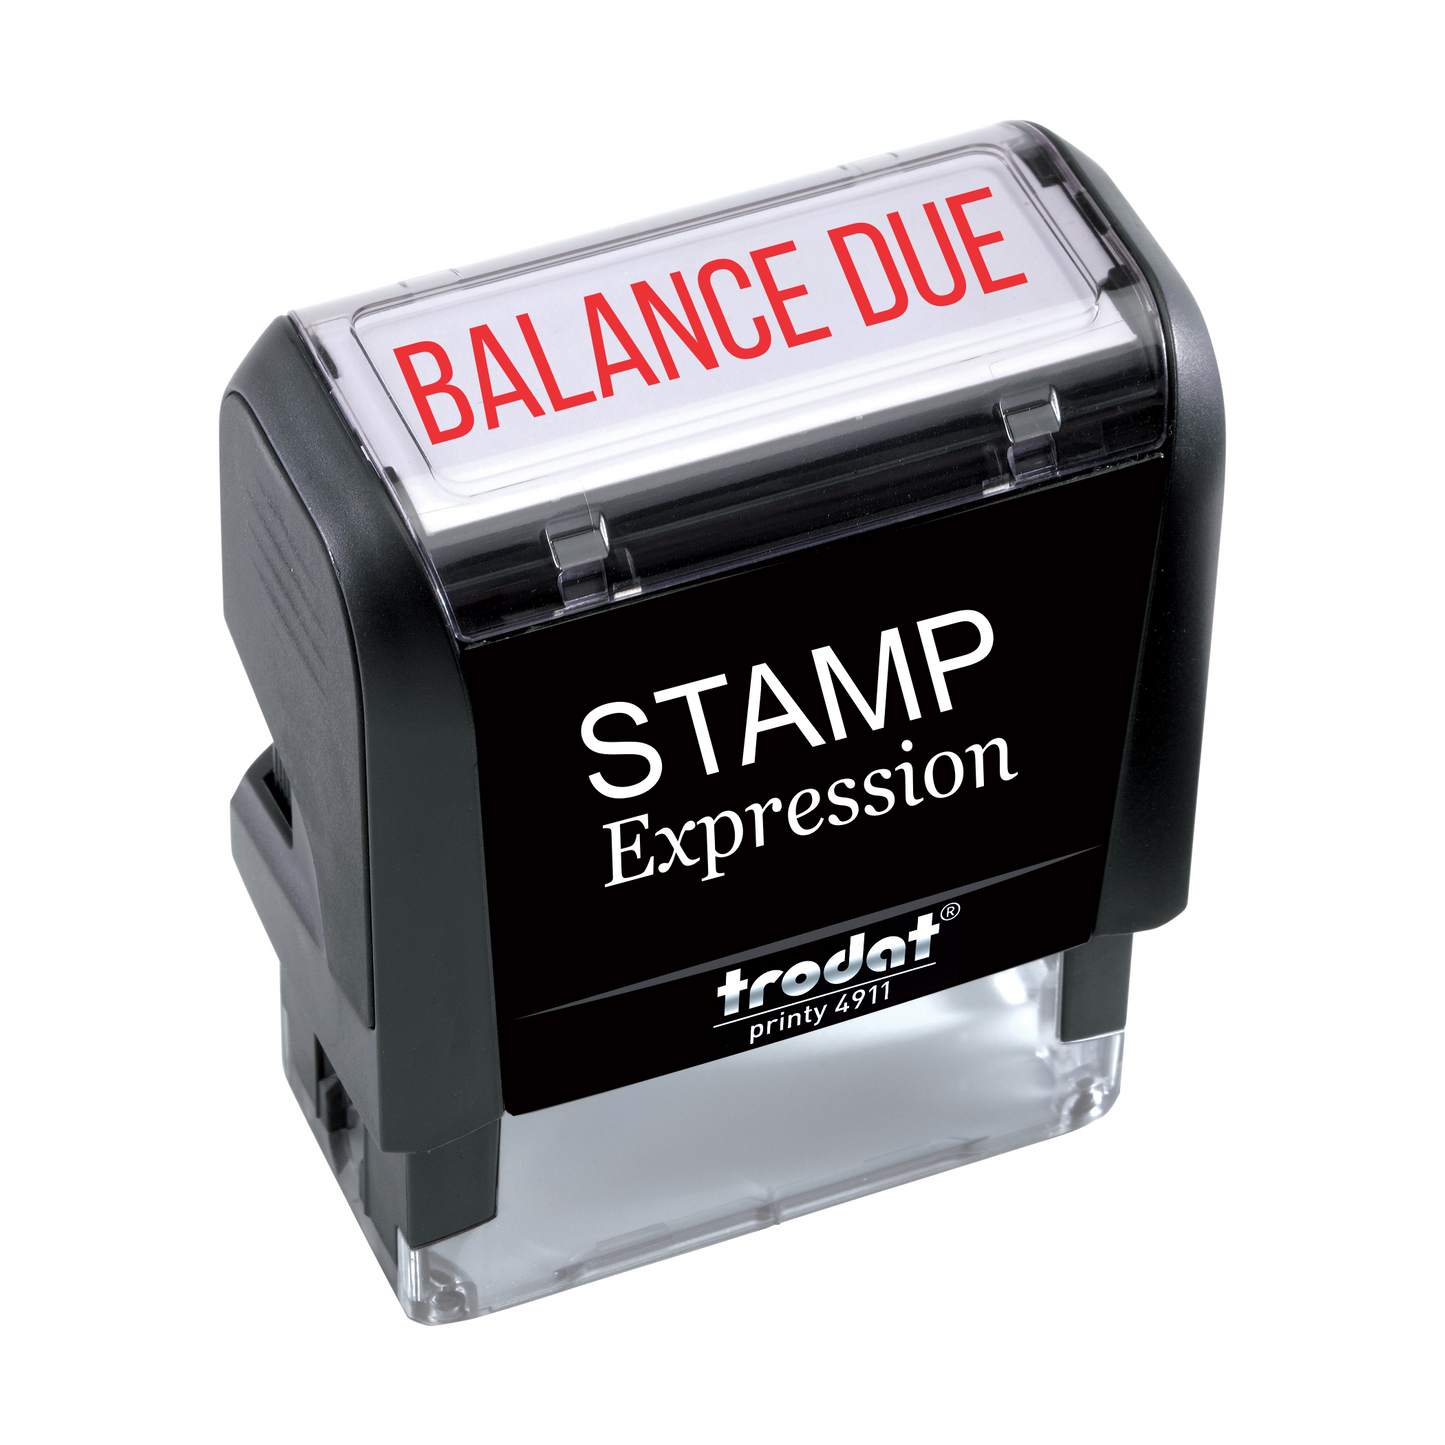 Balance Due Office Self Inking Rubber Stamp (SH-5223)